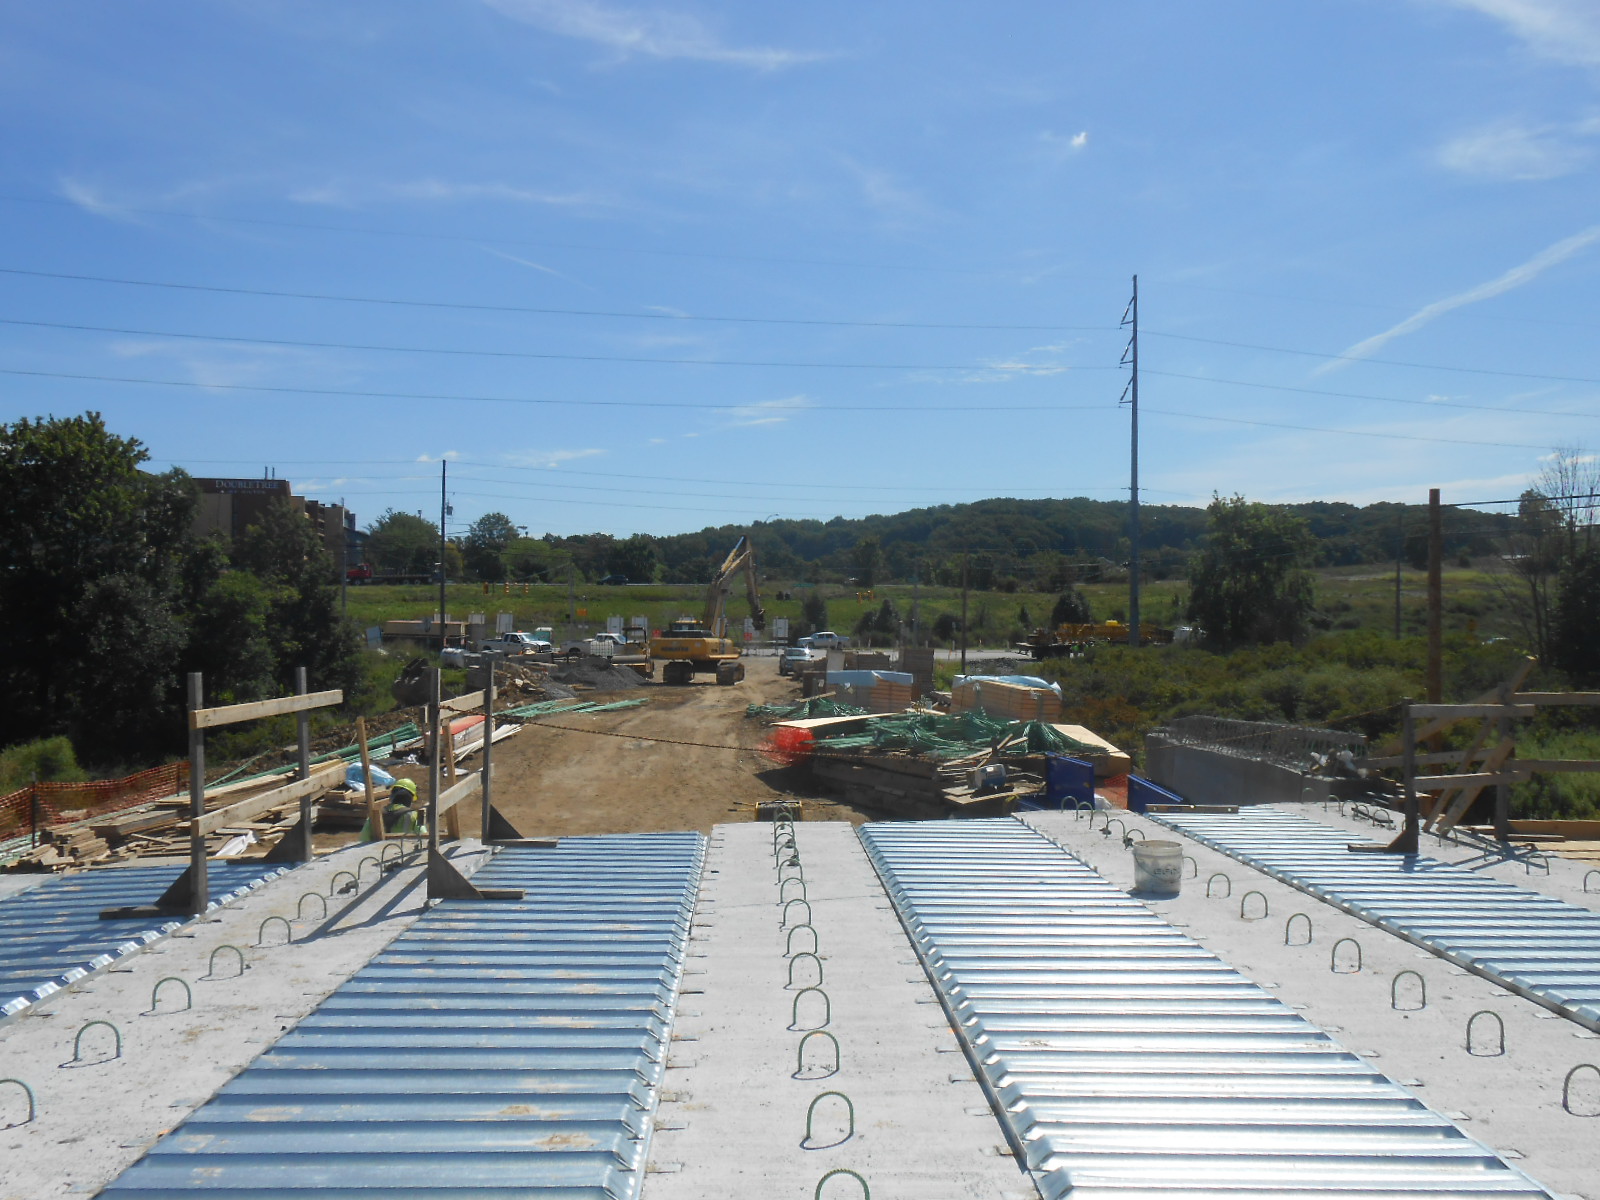 Bridge Deck and Roadway Construction Looking North (7/30/2015)